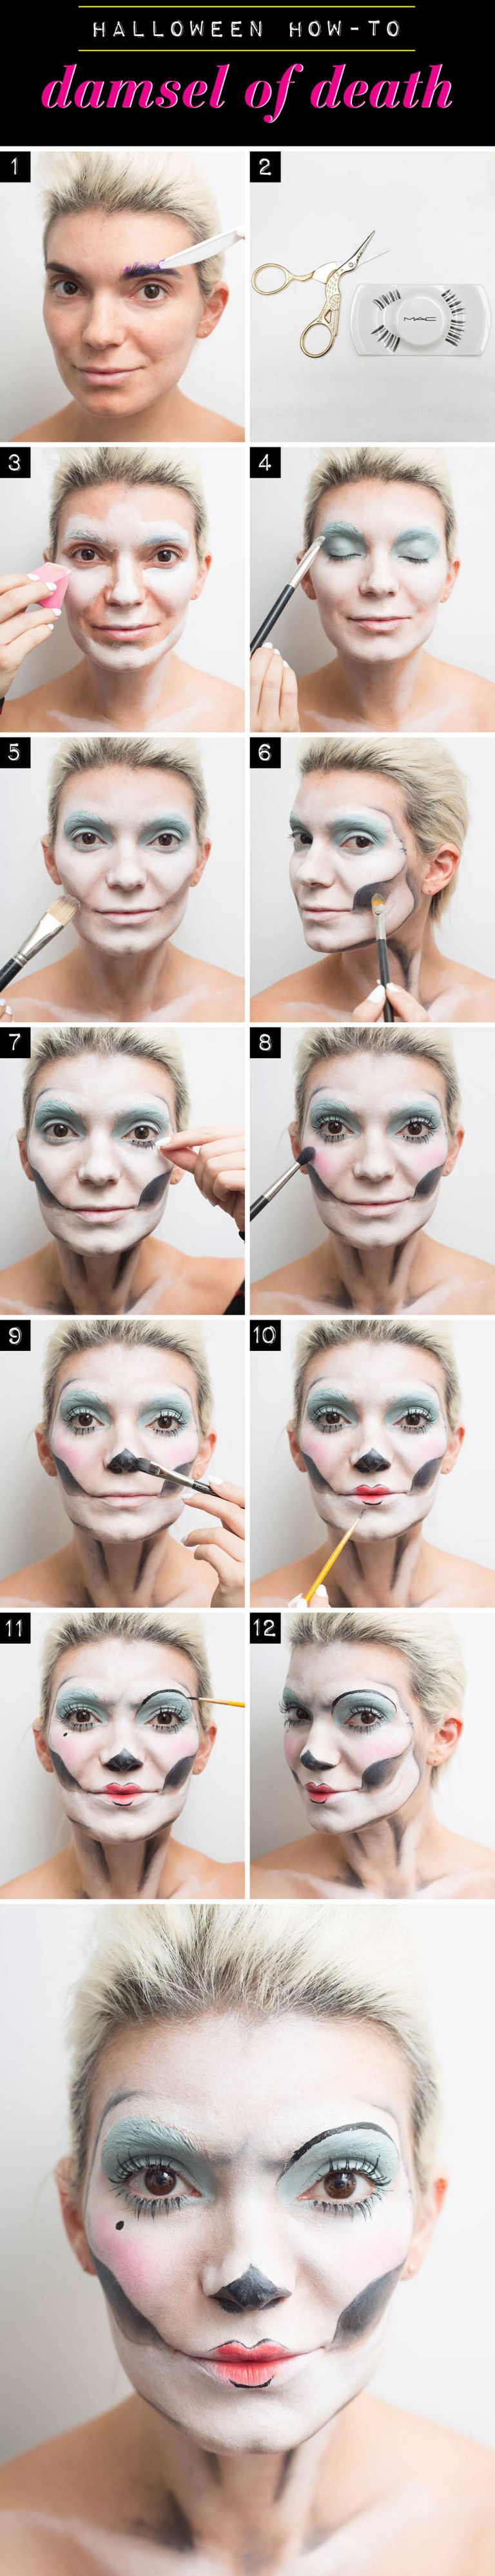 The Most Terrifying Halloween Makeup Tutorials You Need To See